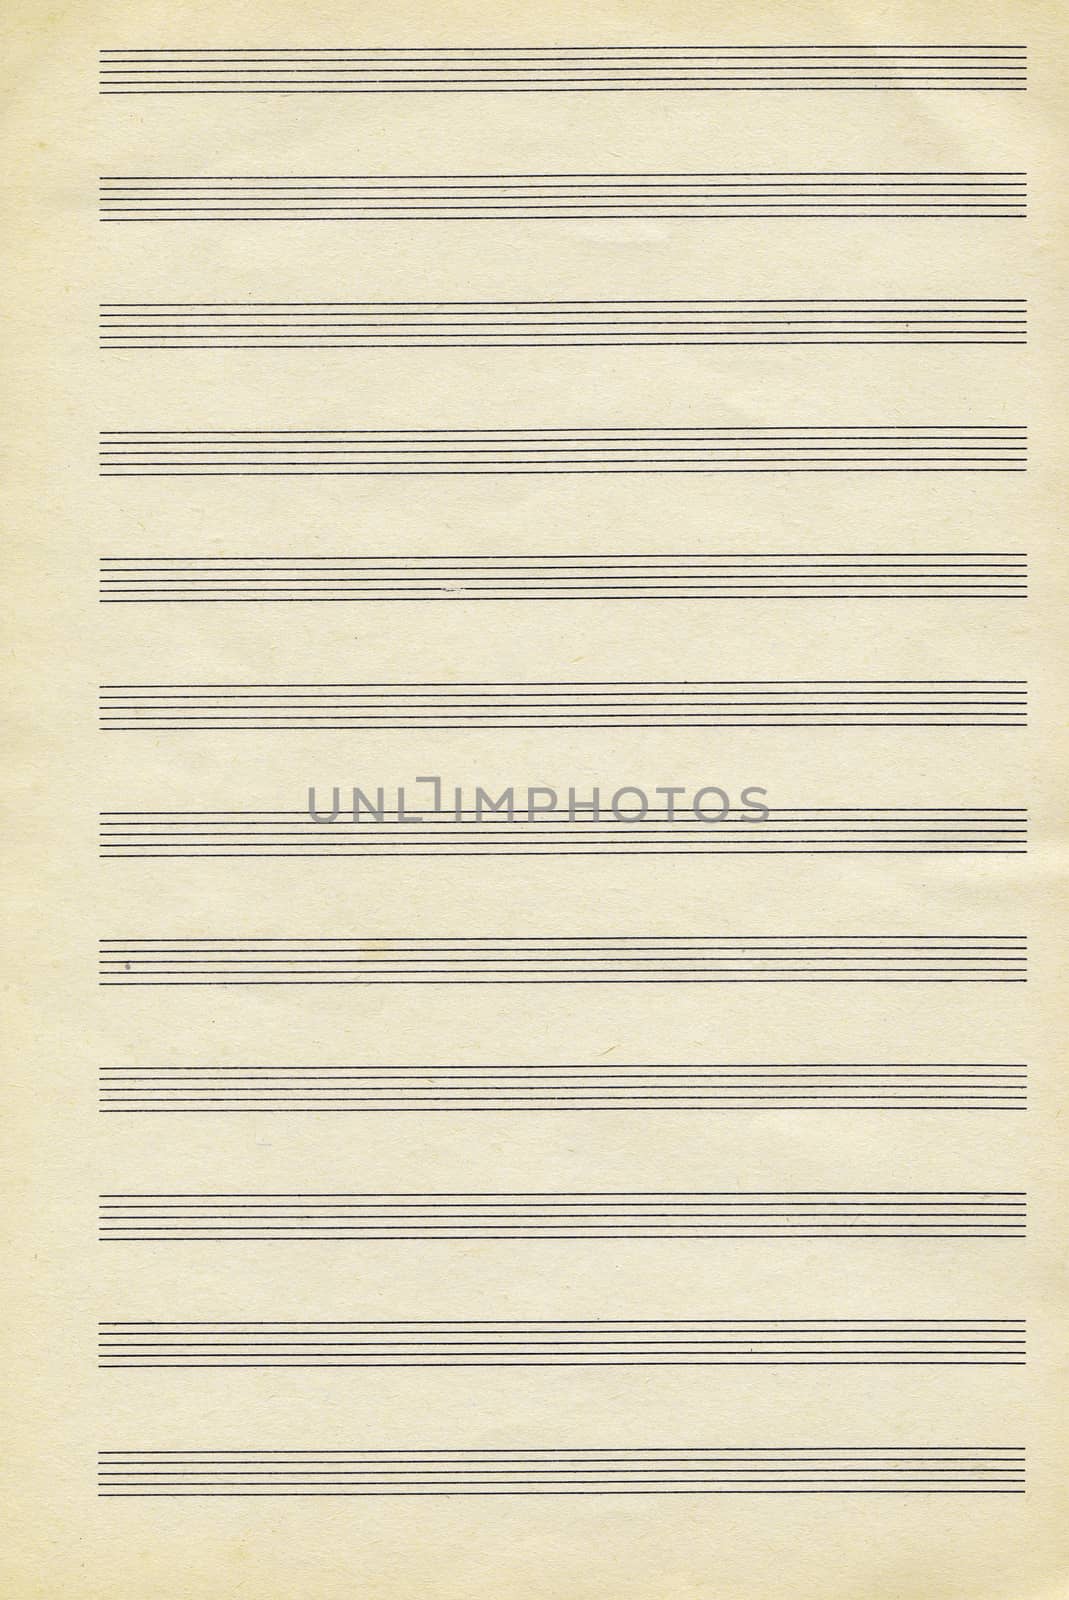 Empty sheet of a vintage note paper for musical notes